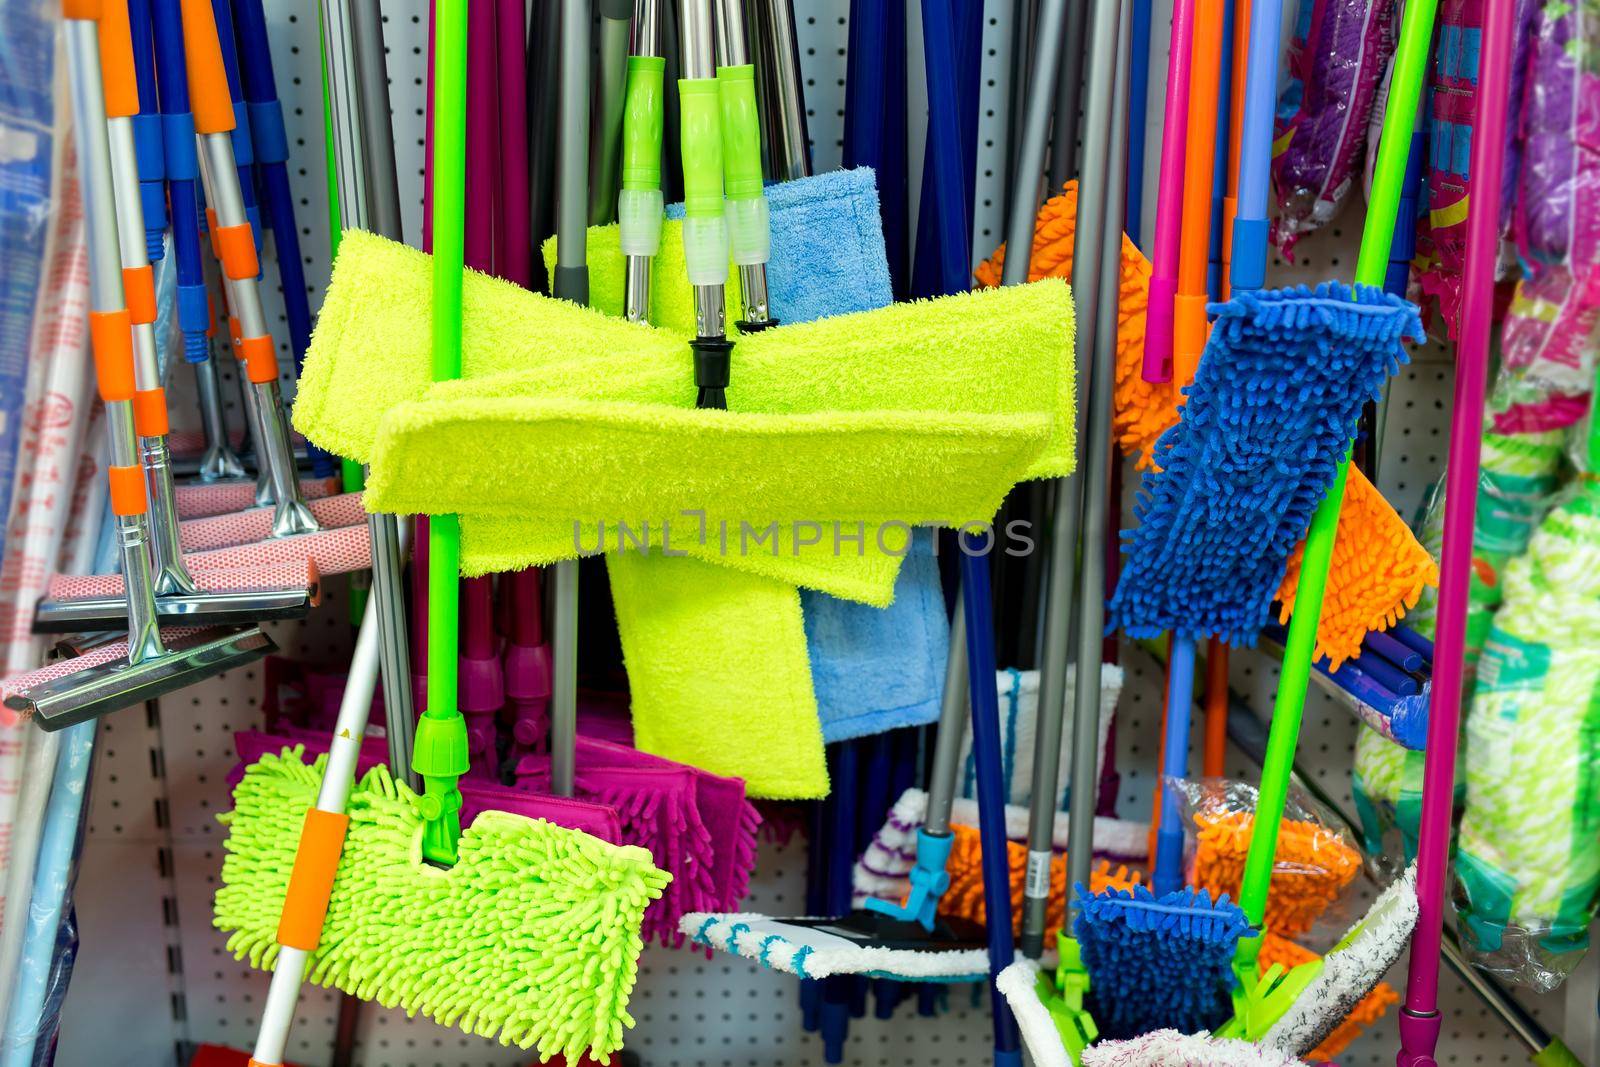 Lots of sponges, rags and mops on shelves in the supermarket